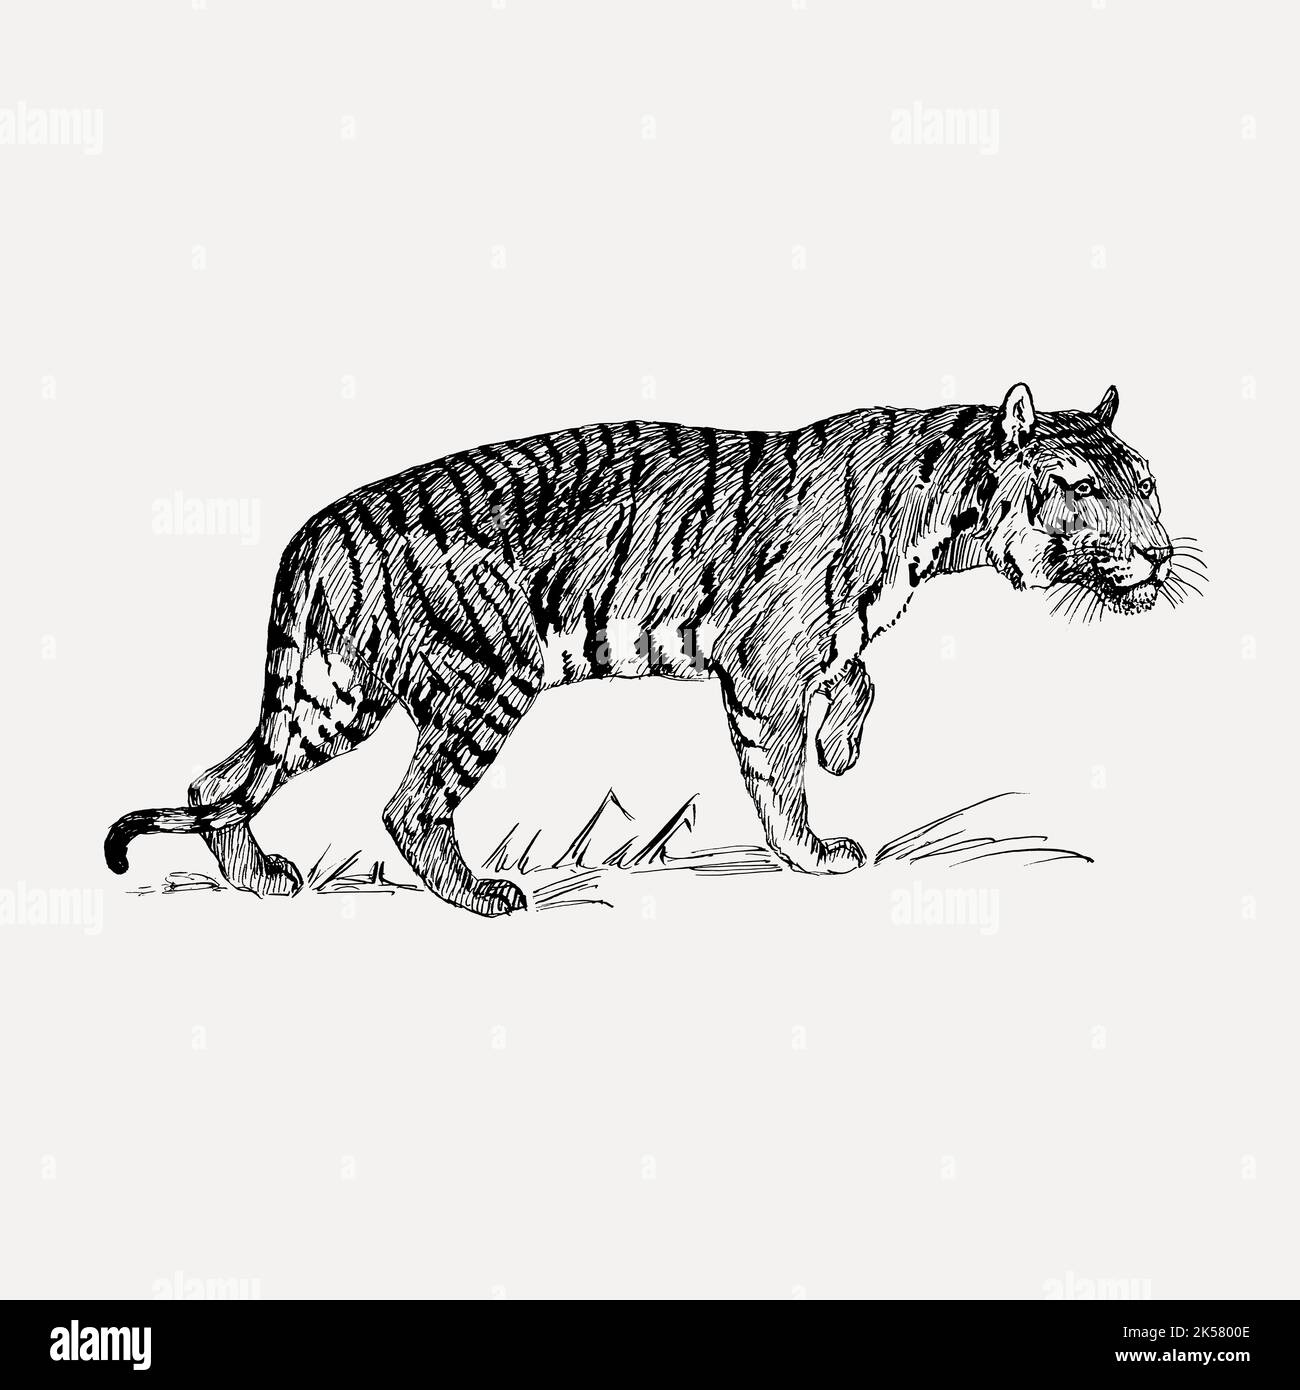 tiger, tiger hand drawn, tiger ink, animals, antique, art, artwork, black and white, bw,clip art, clipart Stock Vector